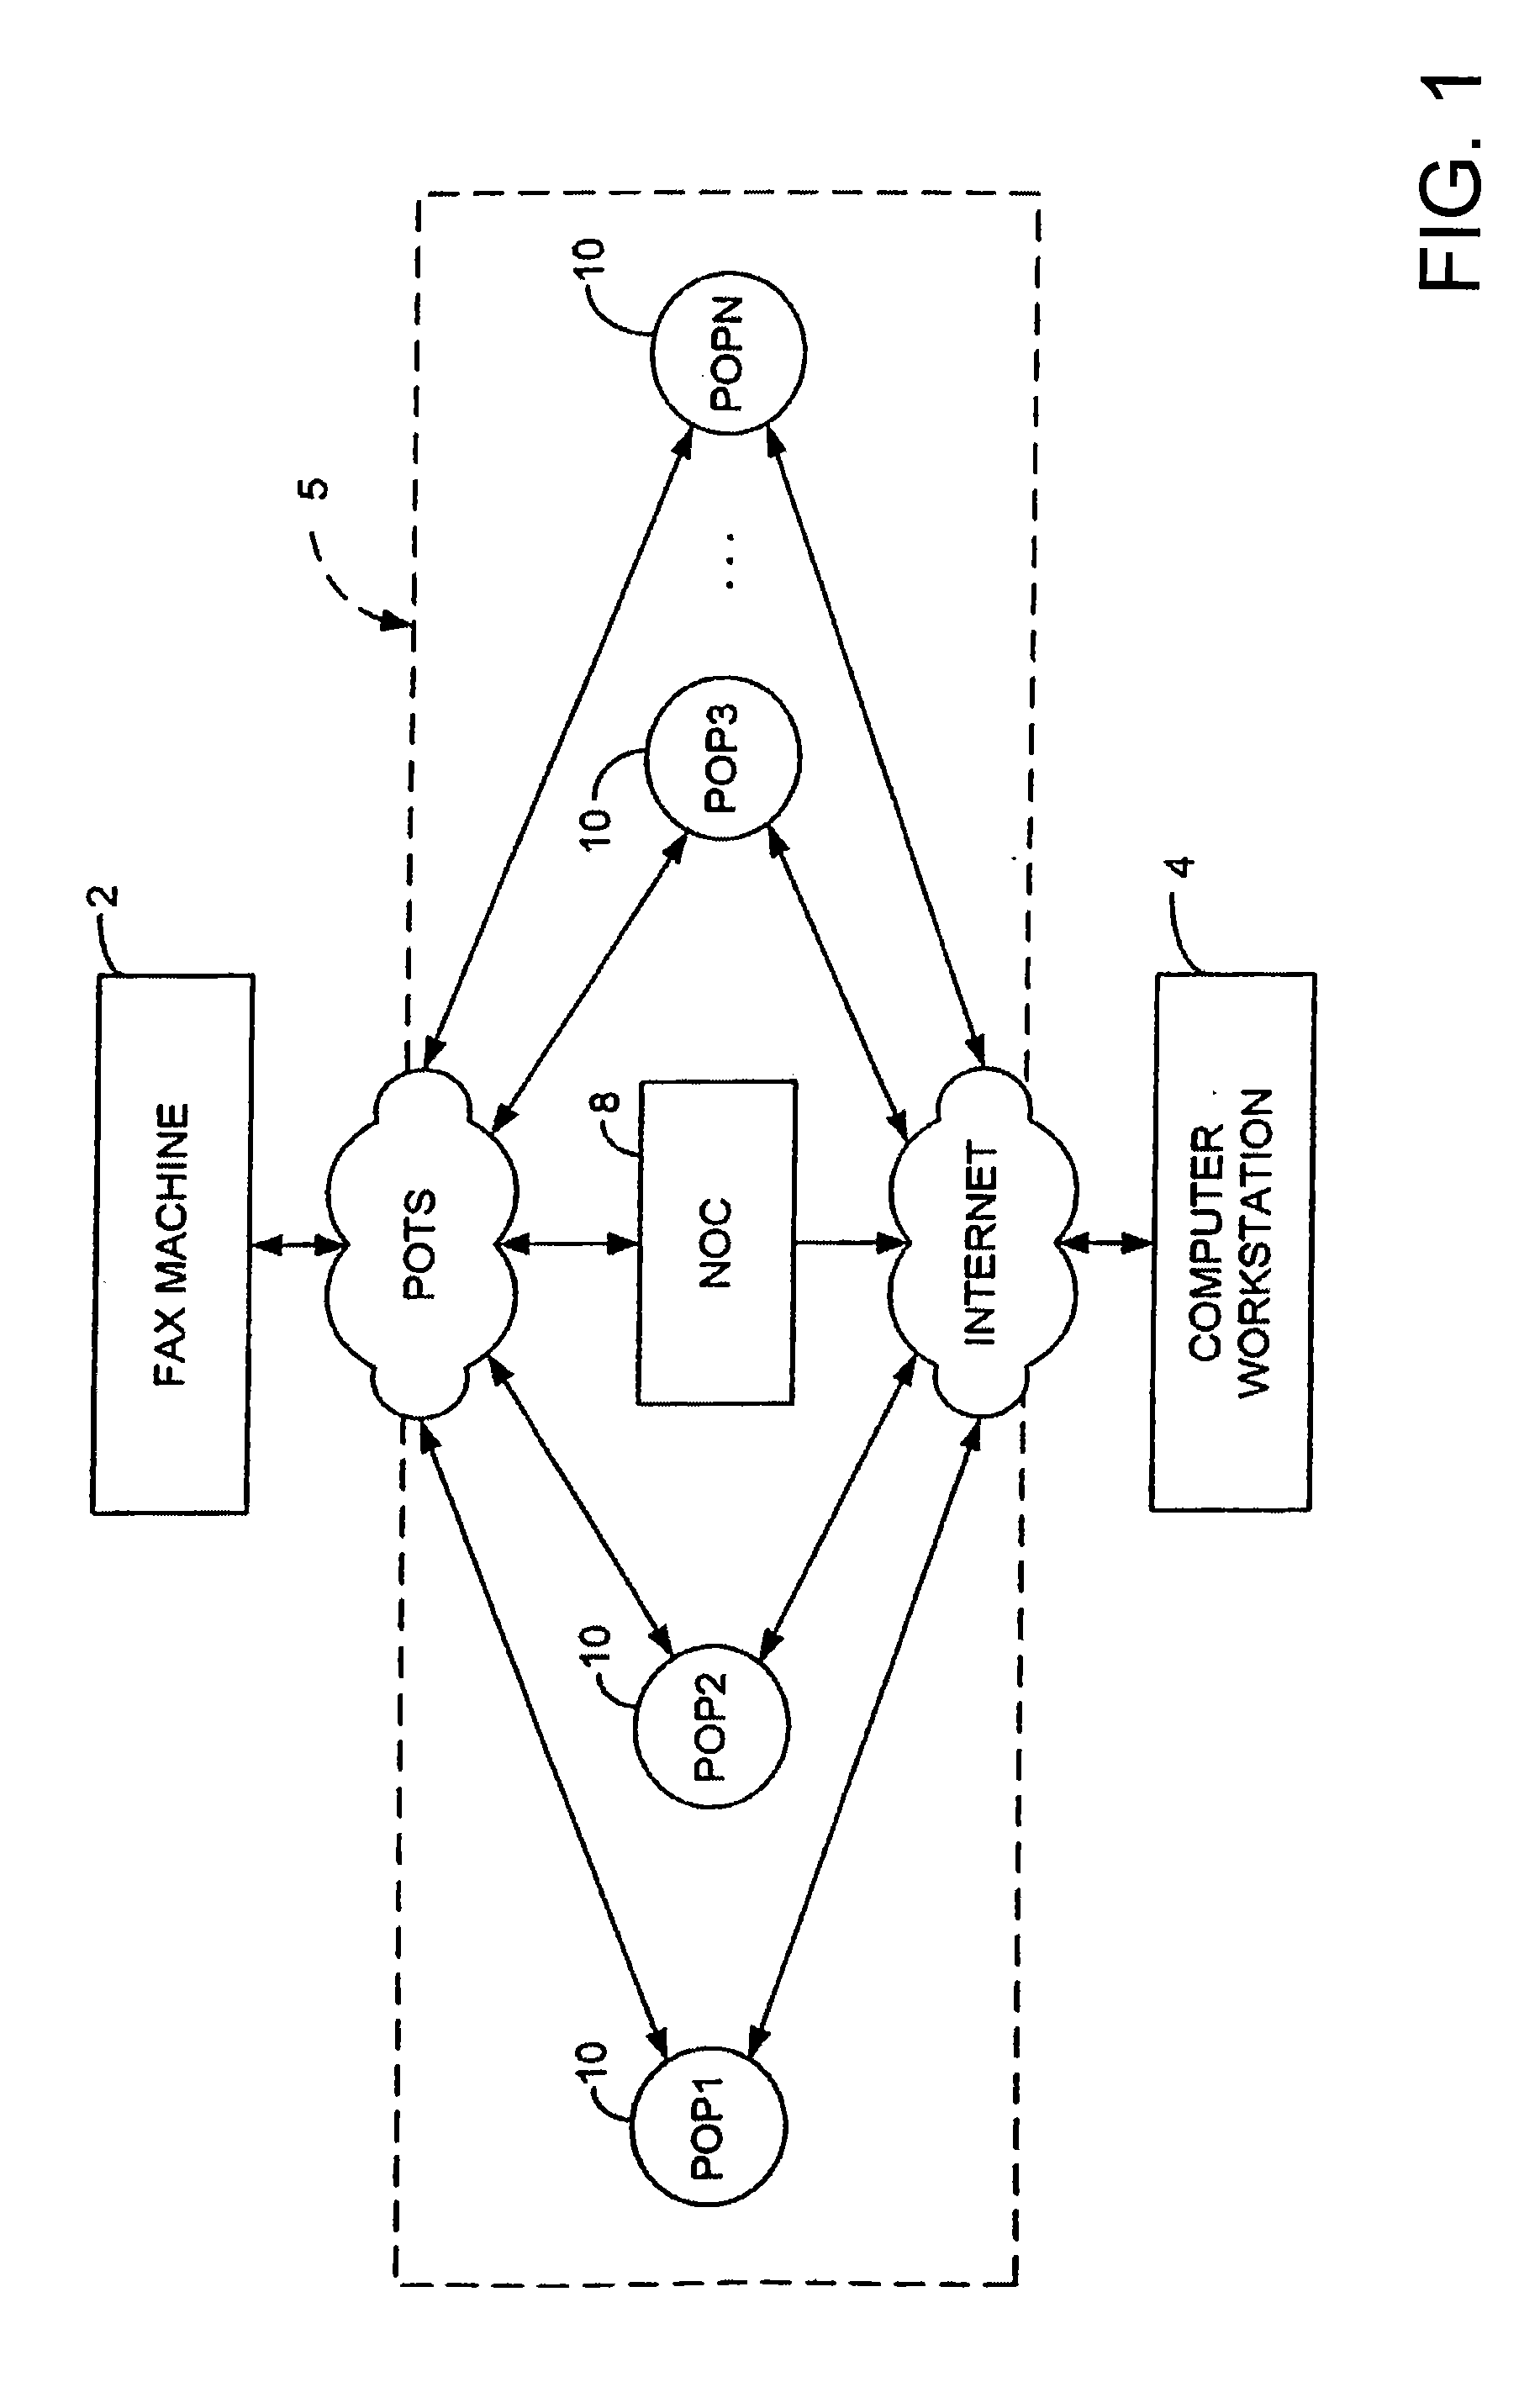 Method and system for modified document transfer via computer network transfer protocols